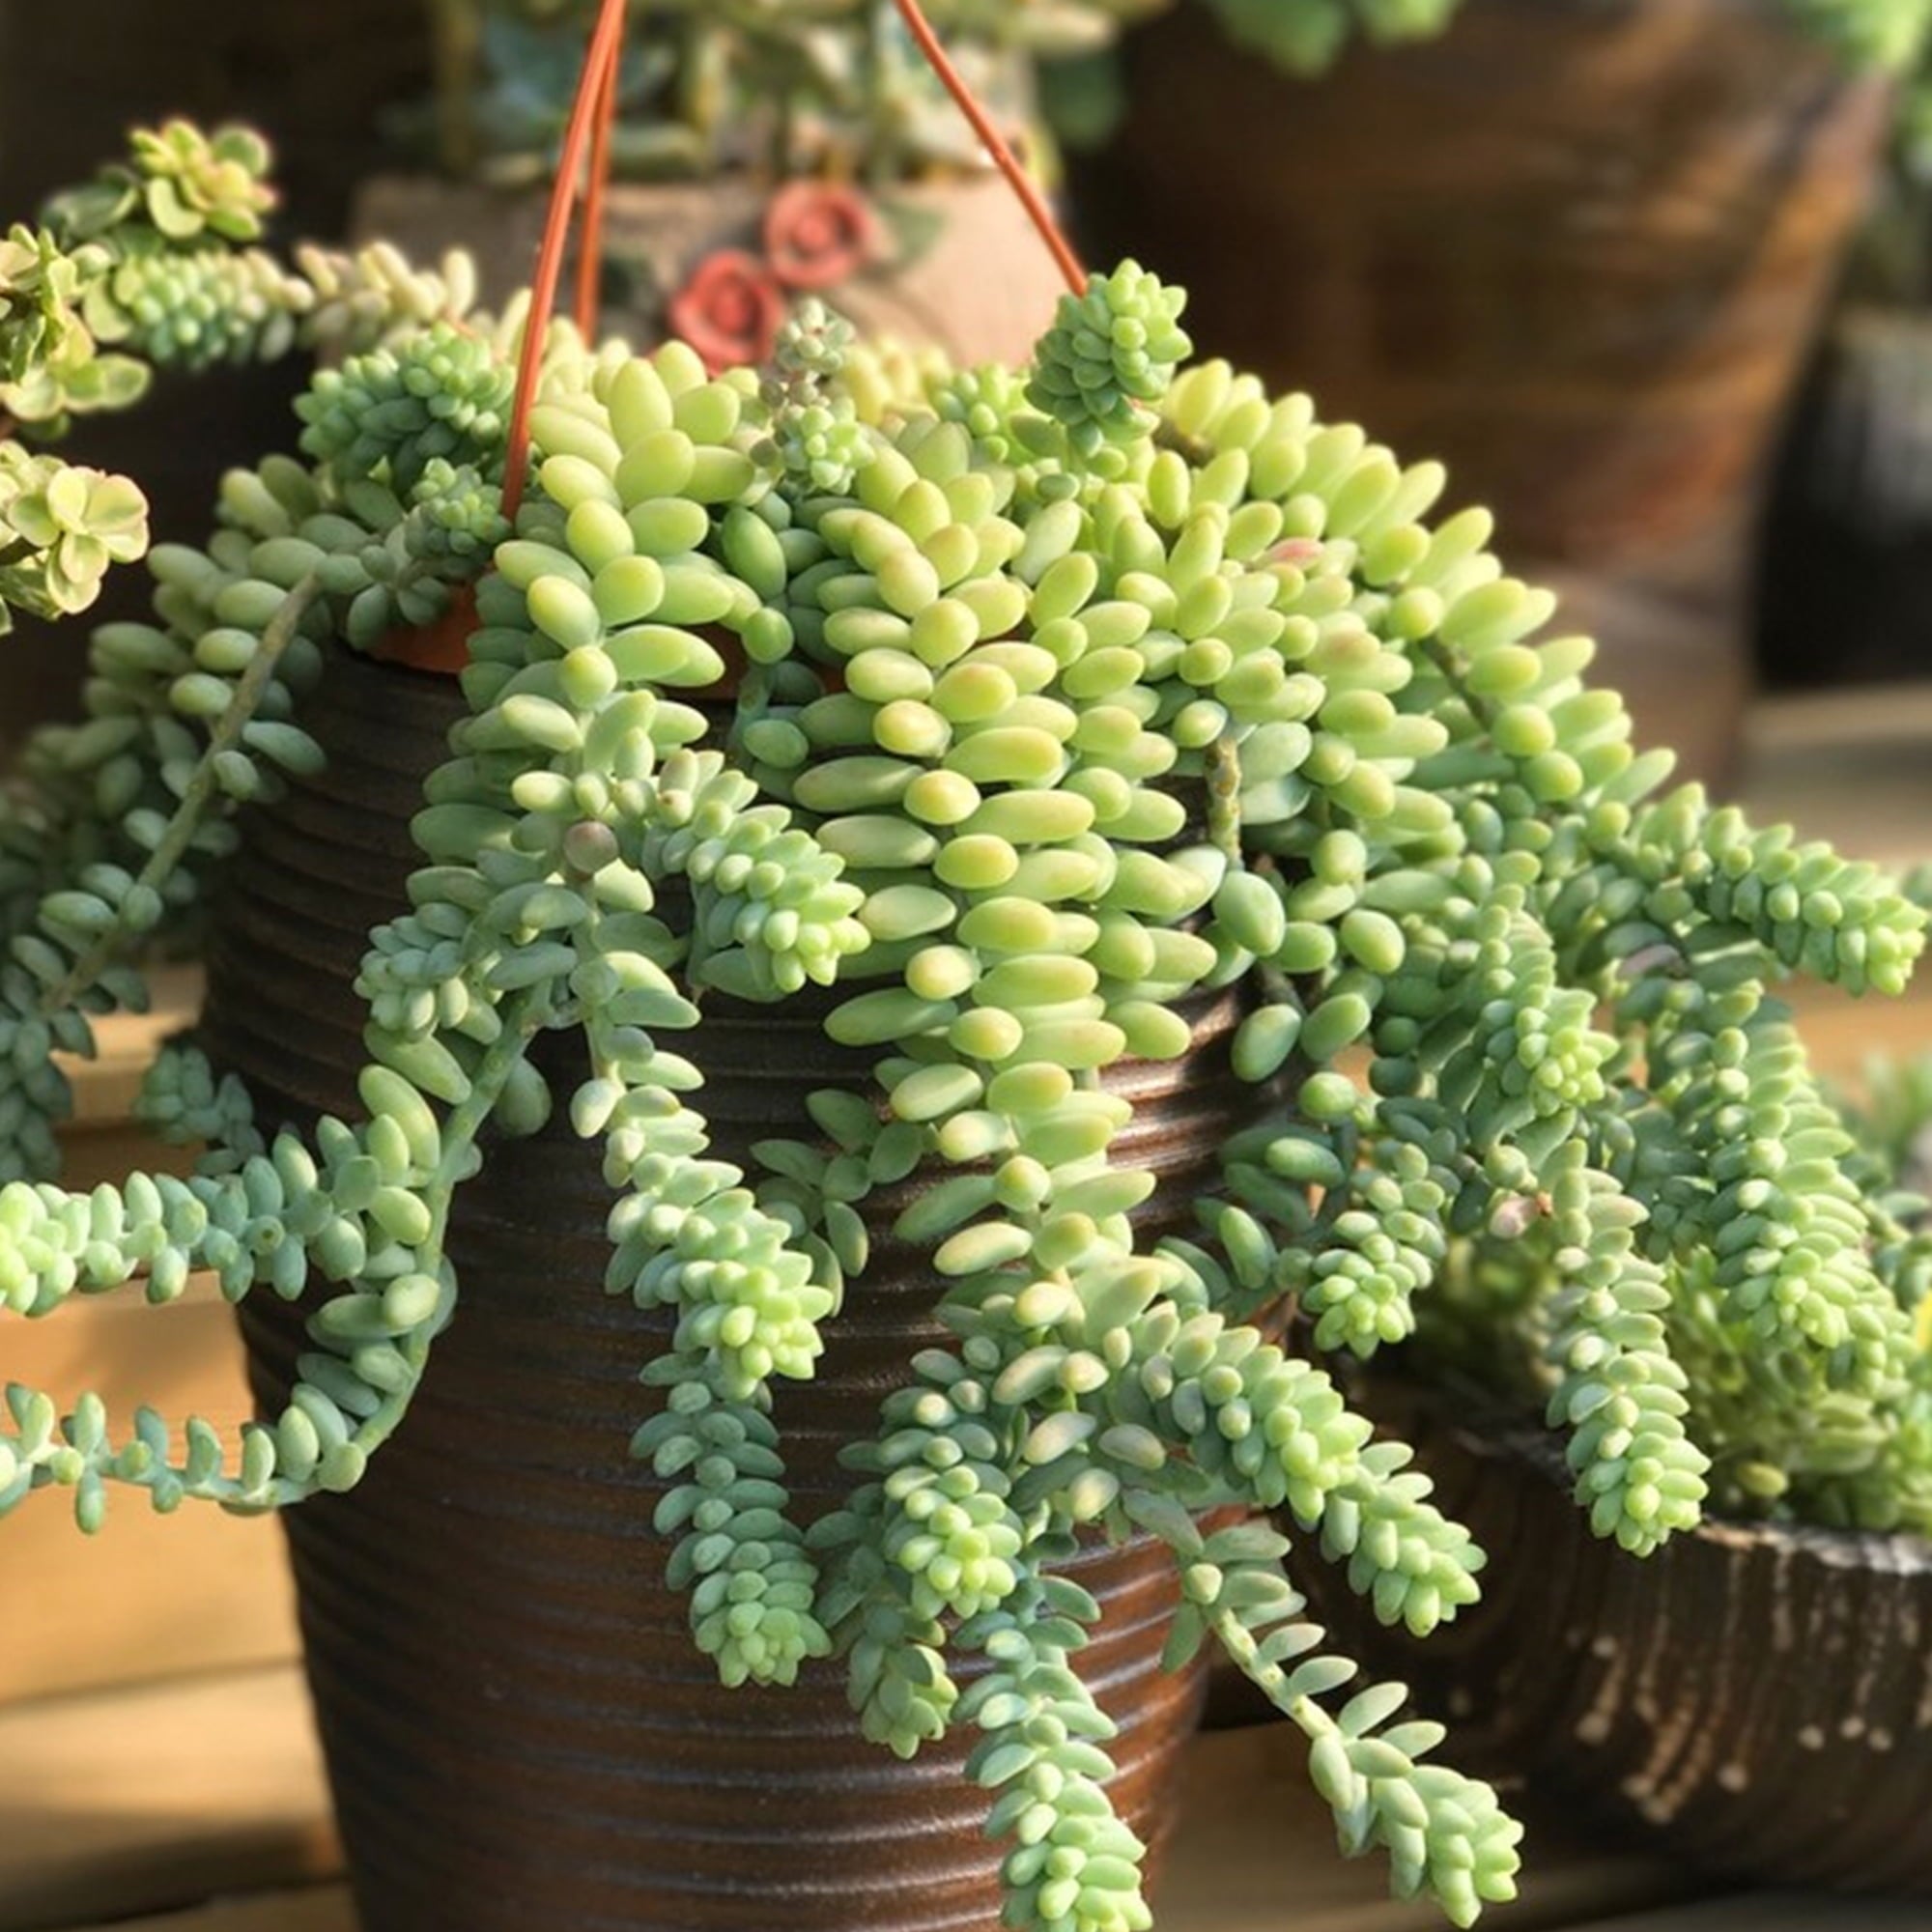 Long Branch 4 inch Burro's Tail Succulents Plants Sedum Morganianum Donkey's Tail Fully Rooted